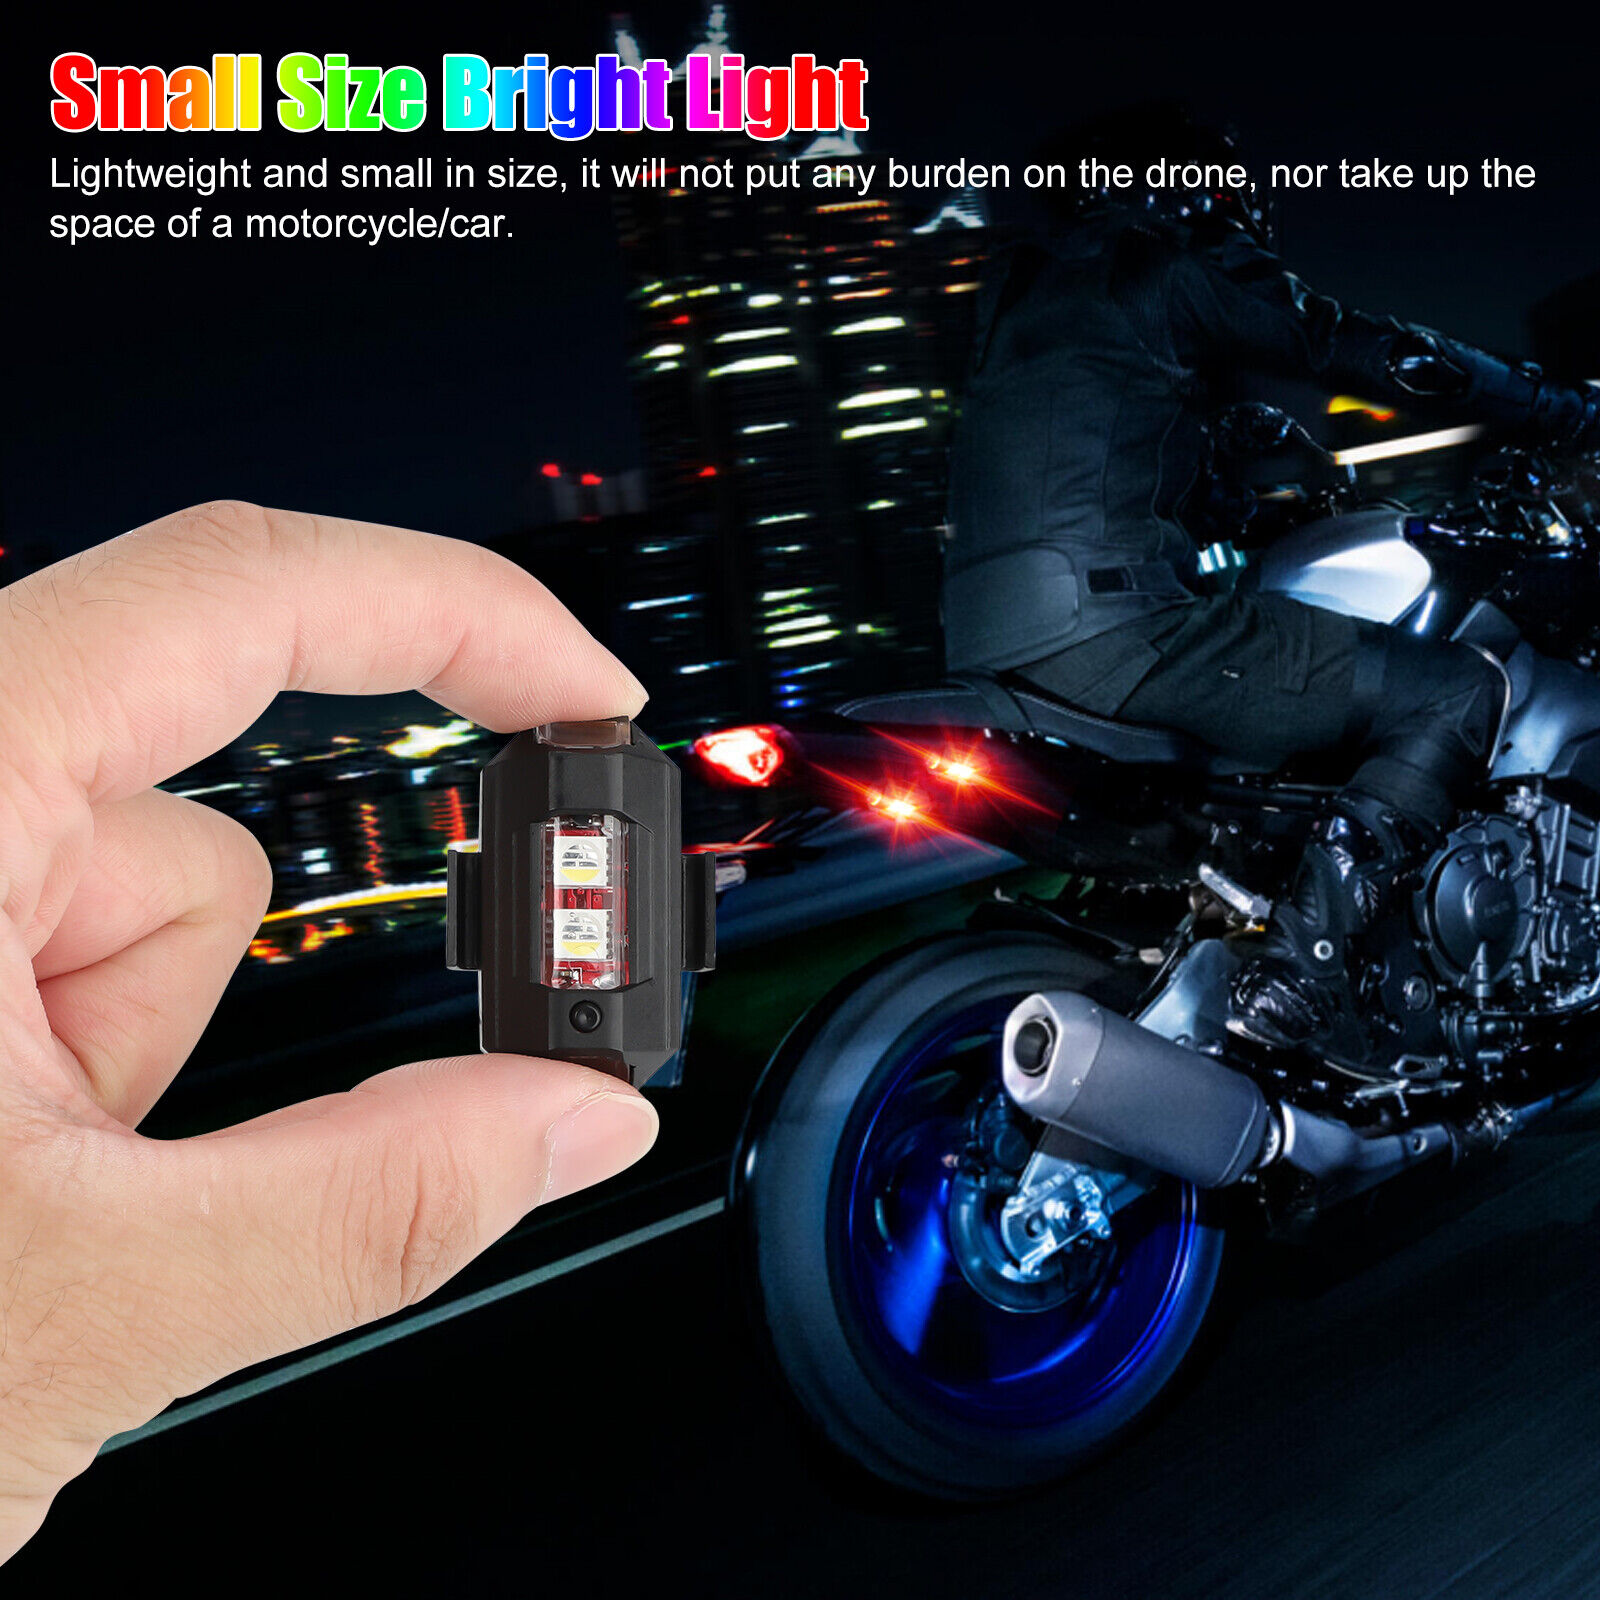 7-Color LED Strobe for Drone/RC Car